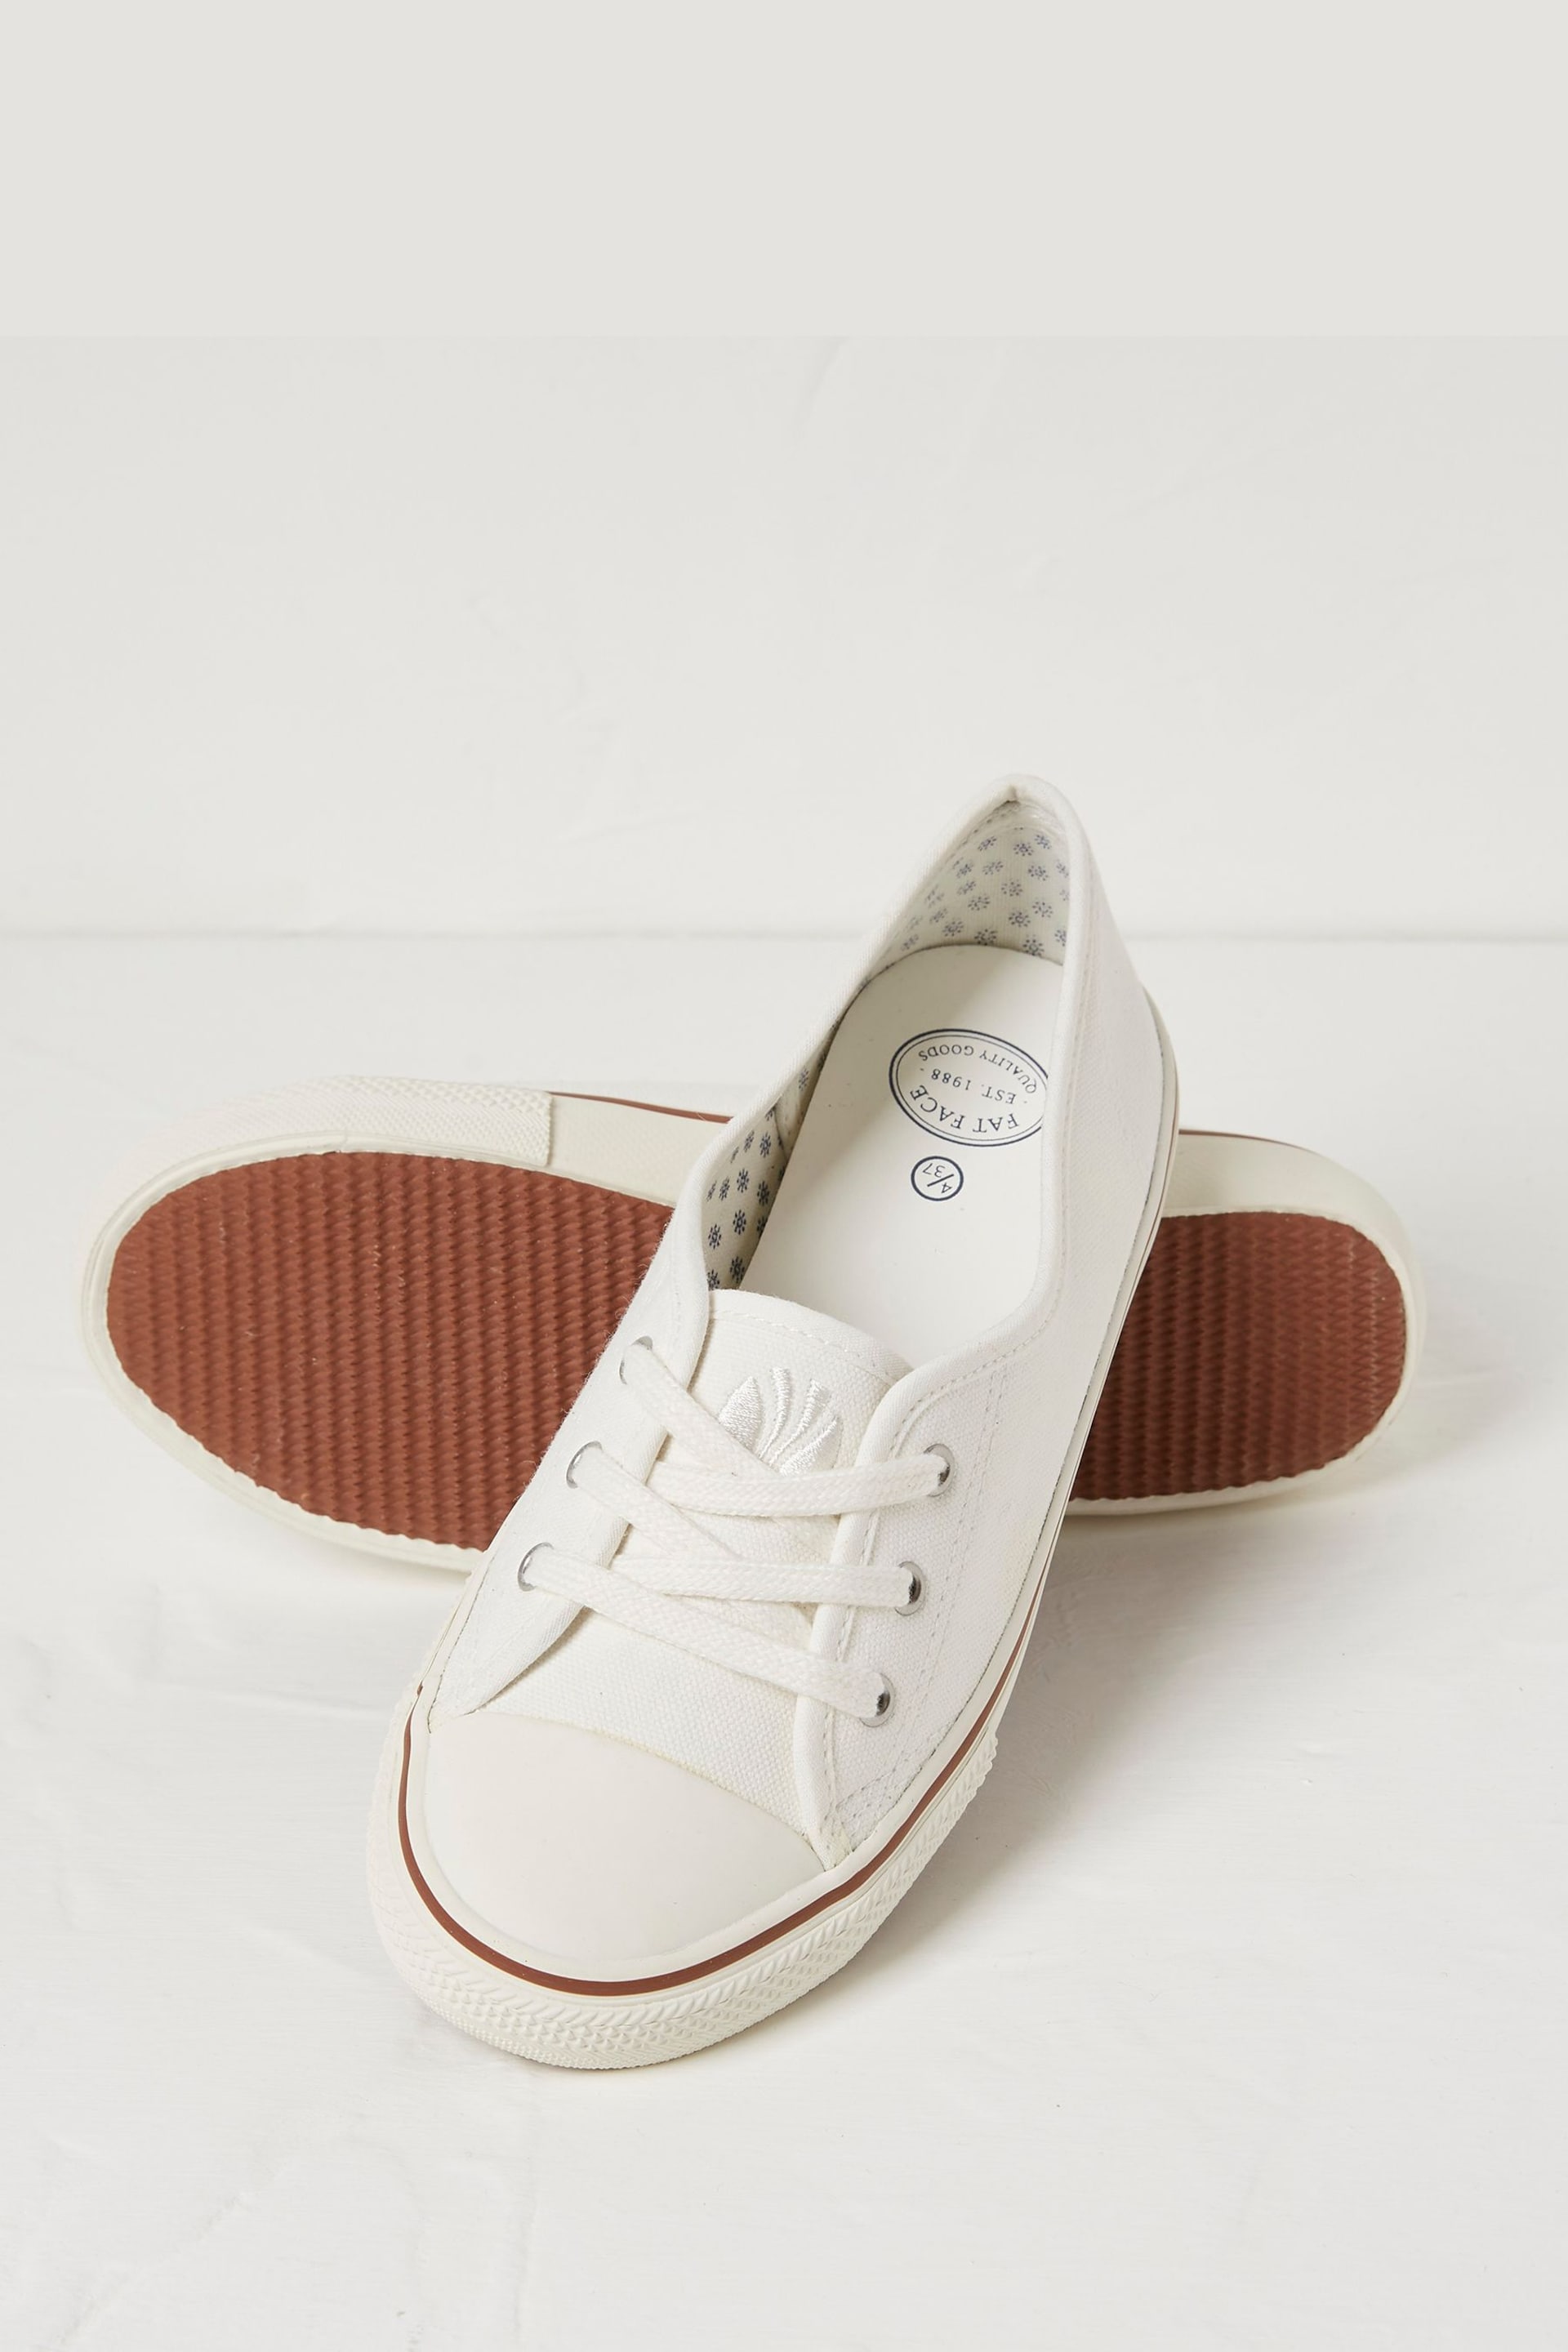 FatFace White Suzie Ballet Trainers - Image 2 of 3